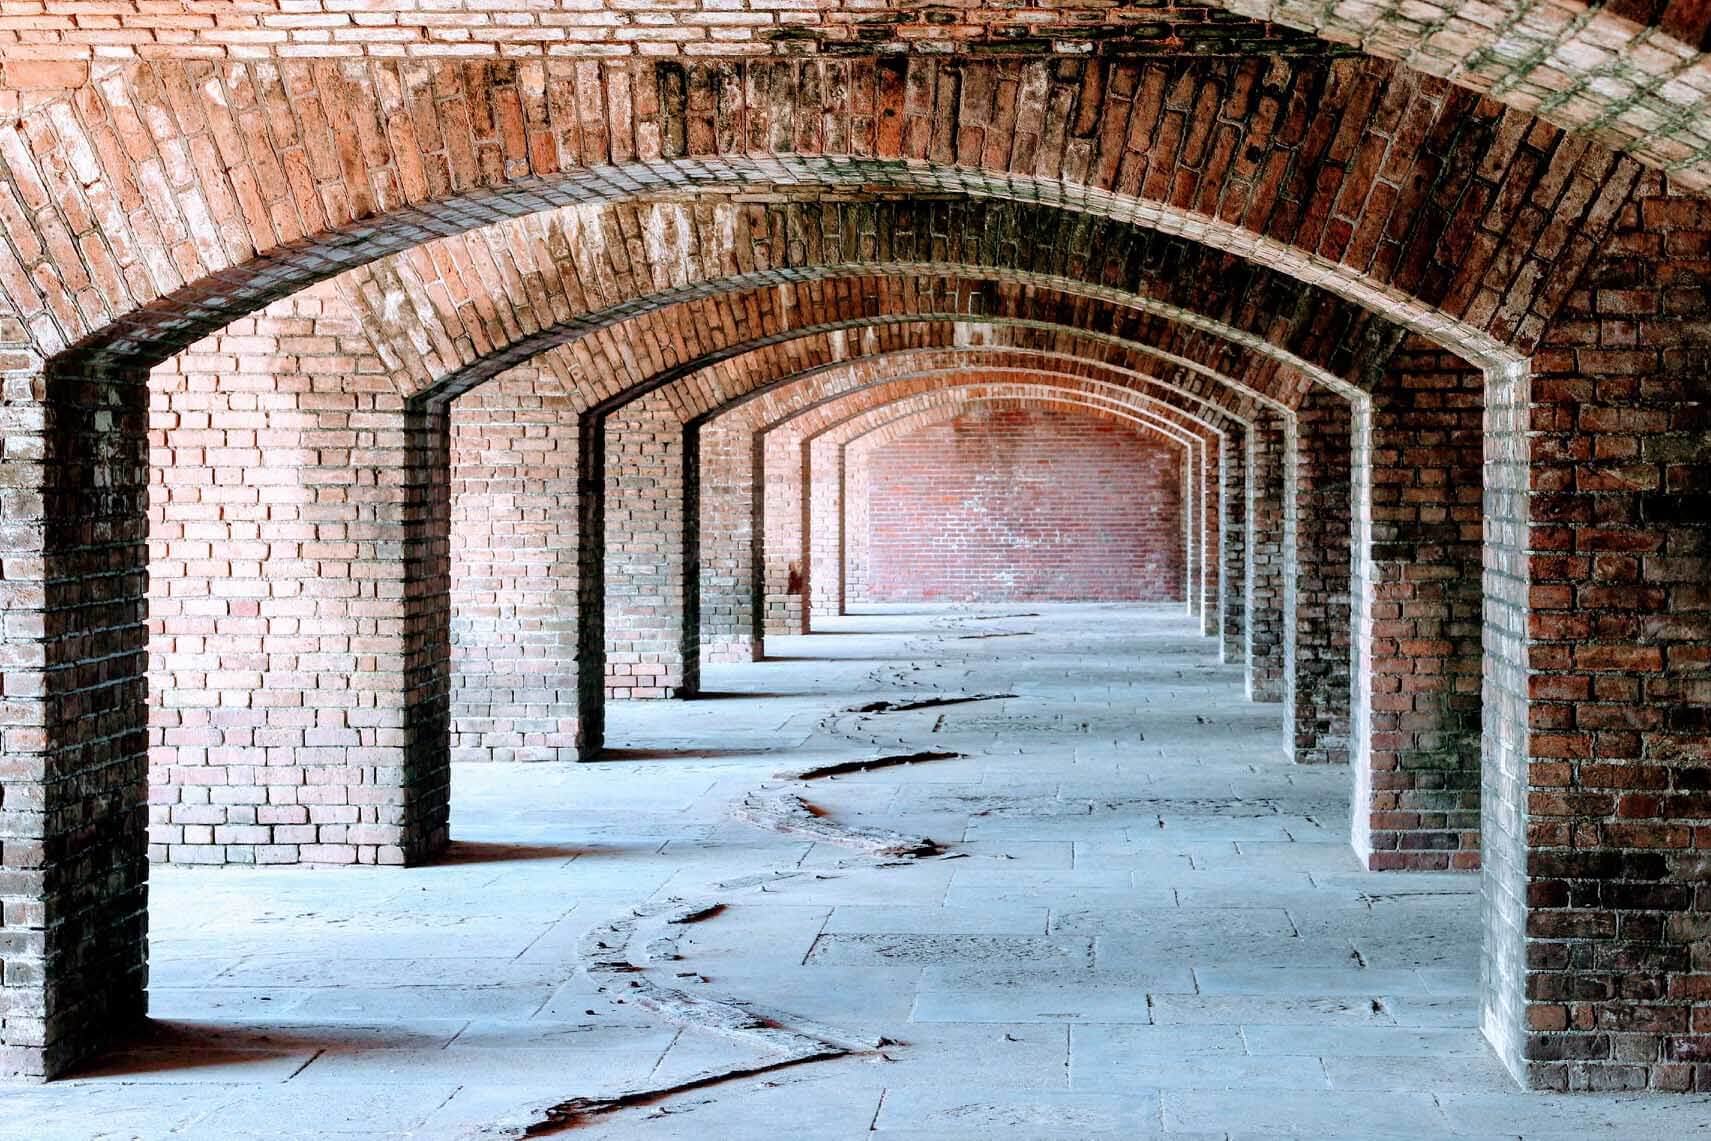 Inside the fort at Dry Tortugas National Park.